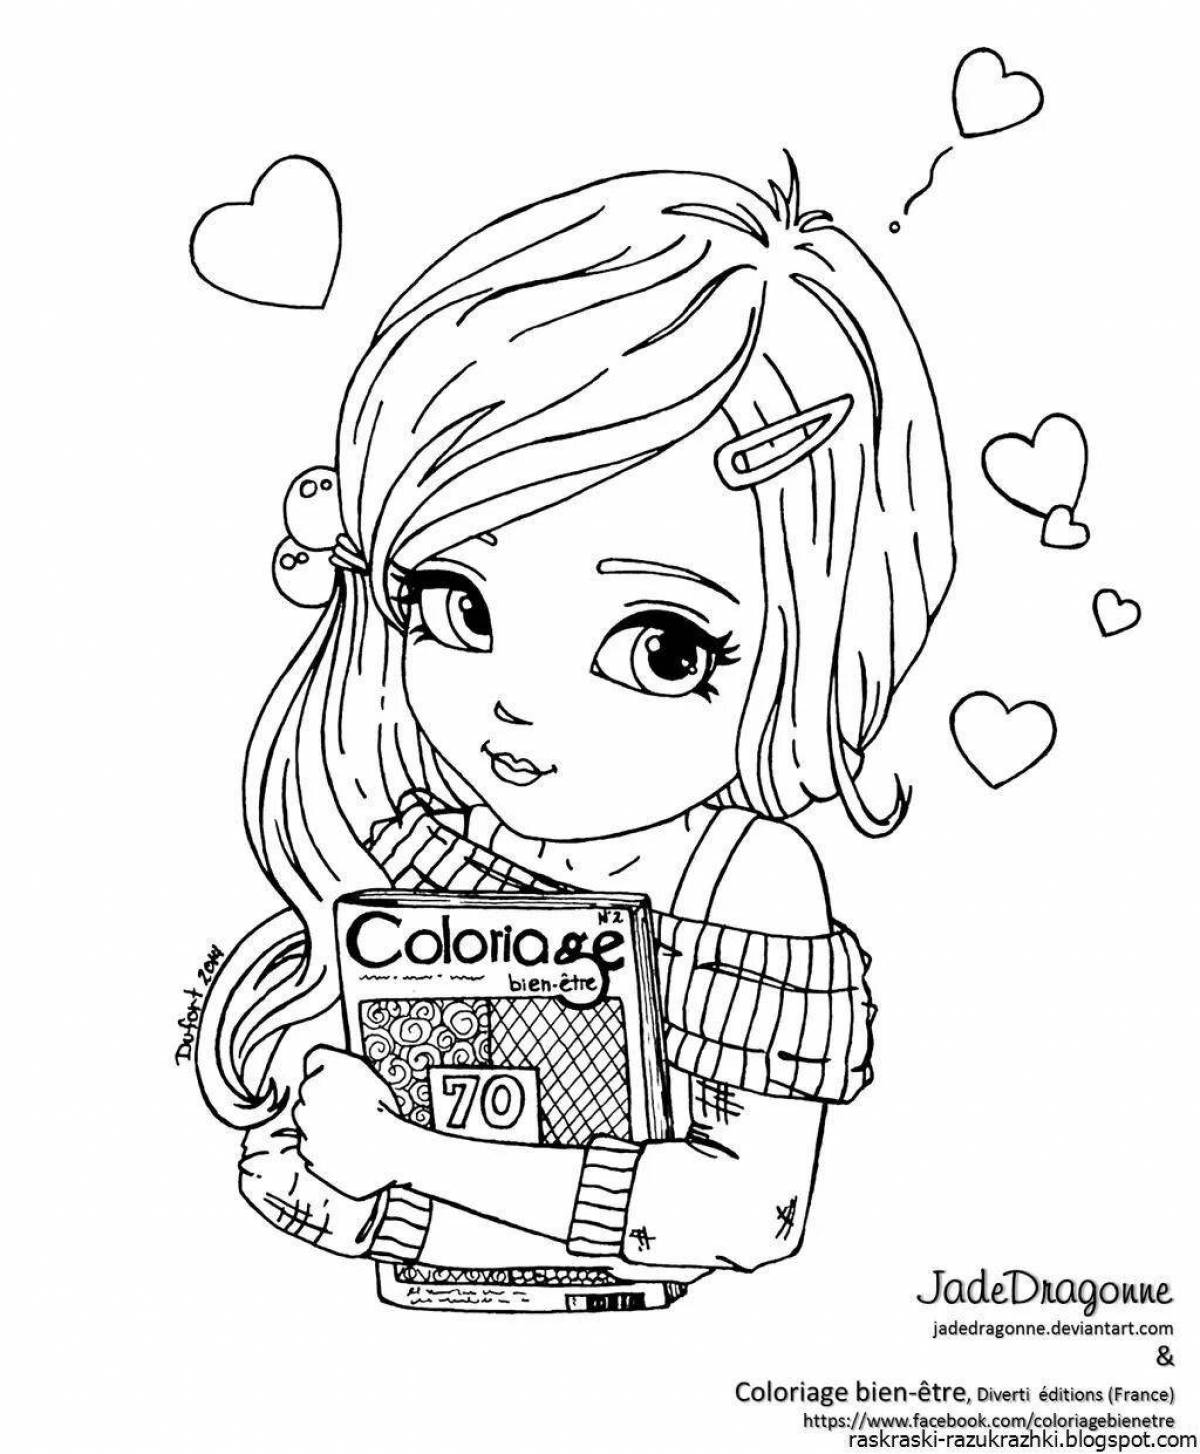 Large coloring book for girls, nice and cute